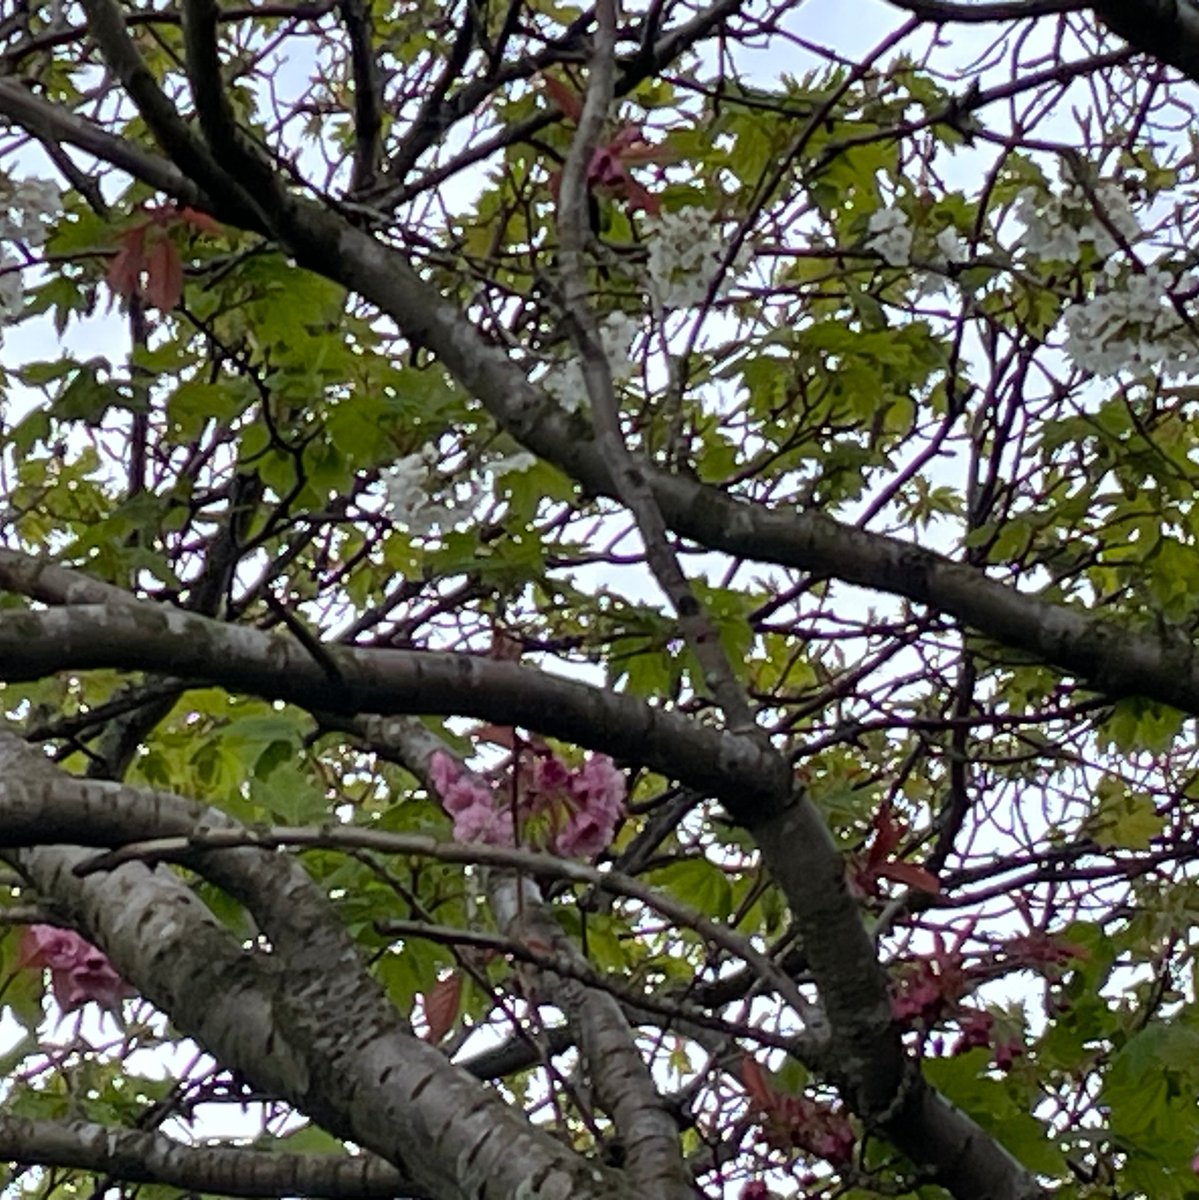 Tree with most pale blossom & a branch with subbranches & twigs with darker pink blossom 🌸 blurry 🙁